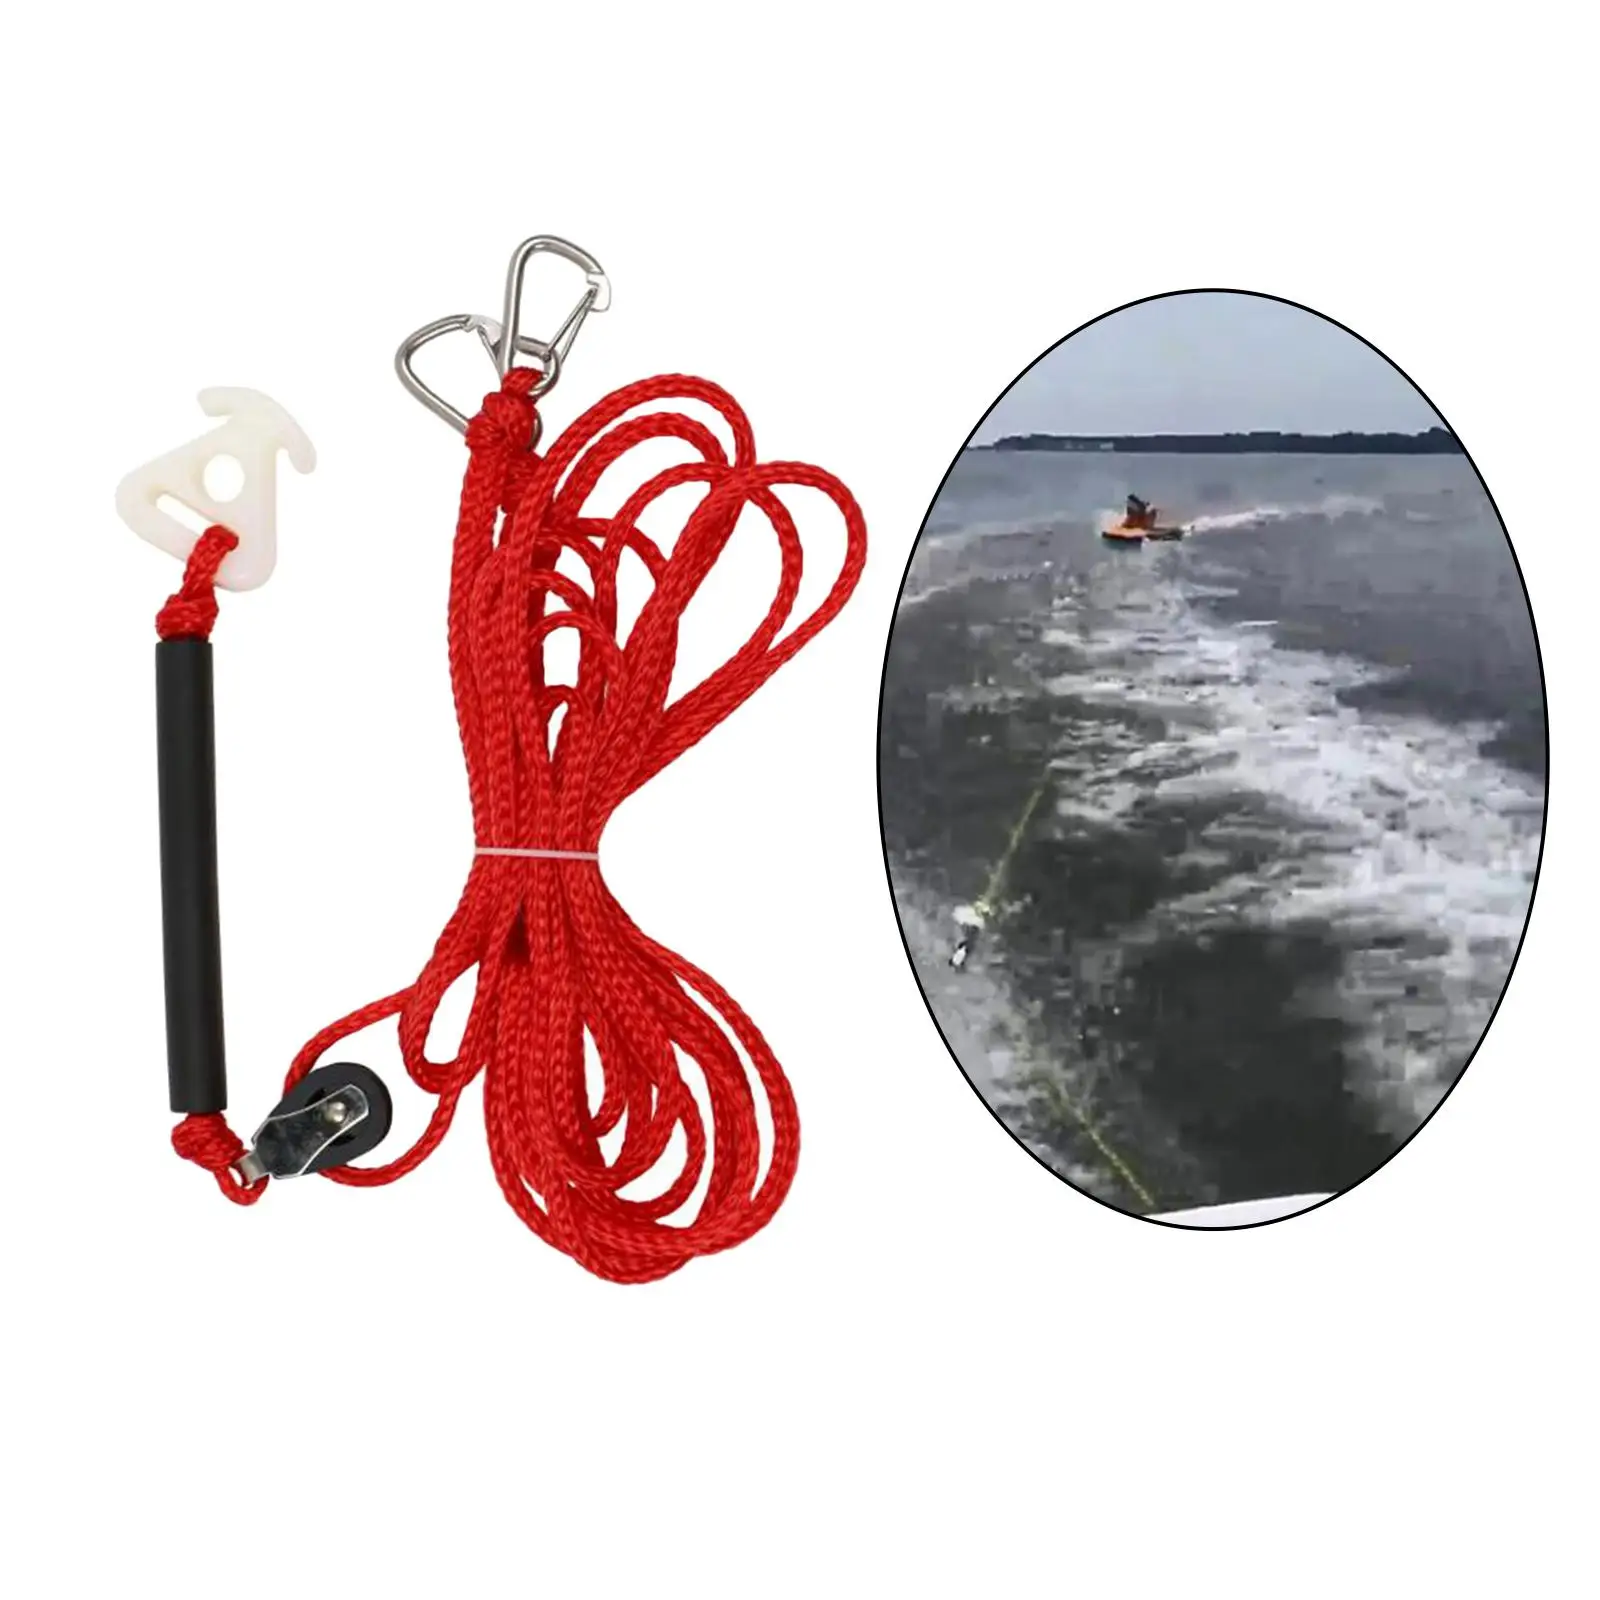 12 Feet Tow Harness Watersports Rope with Hook Quick Connector & Pulley for Boating Water Ski Tubing Wakeboarding Waakeboarding